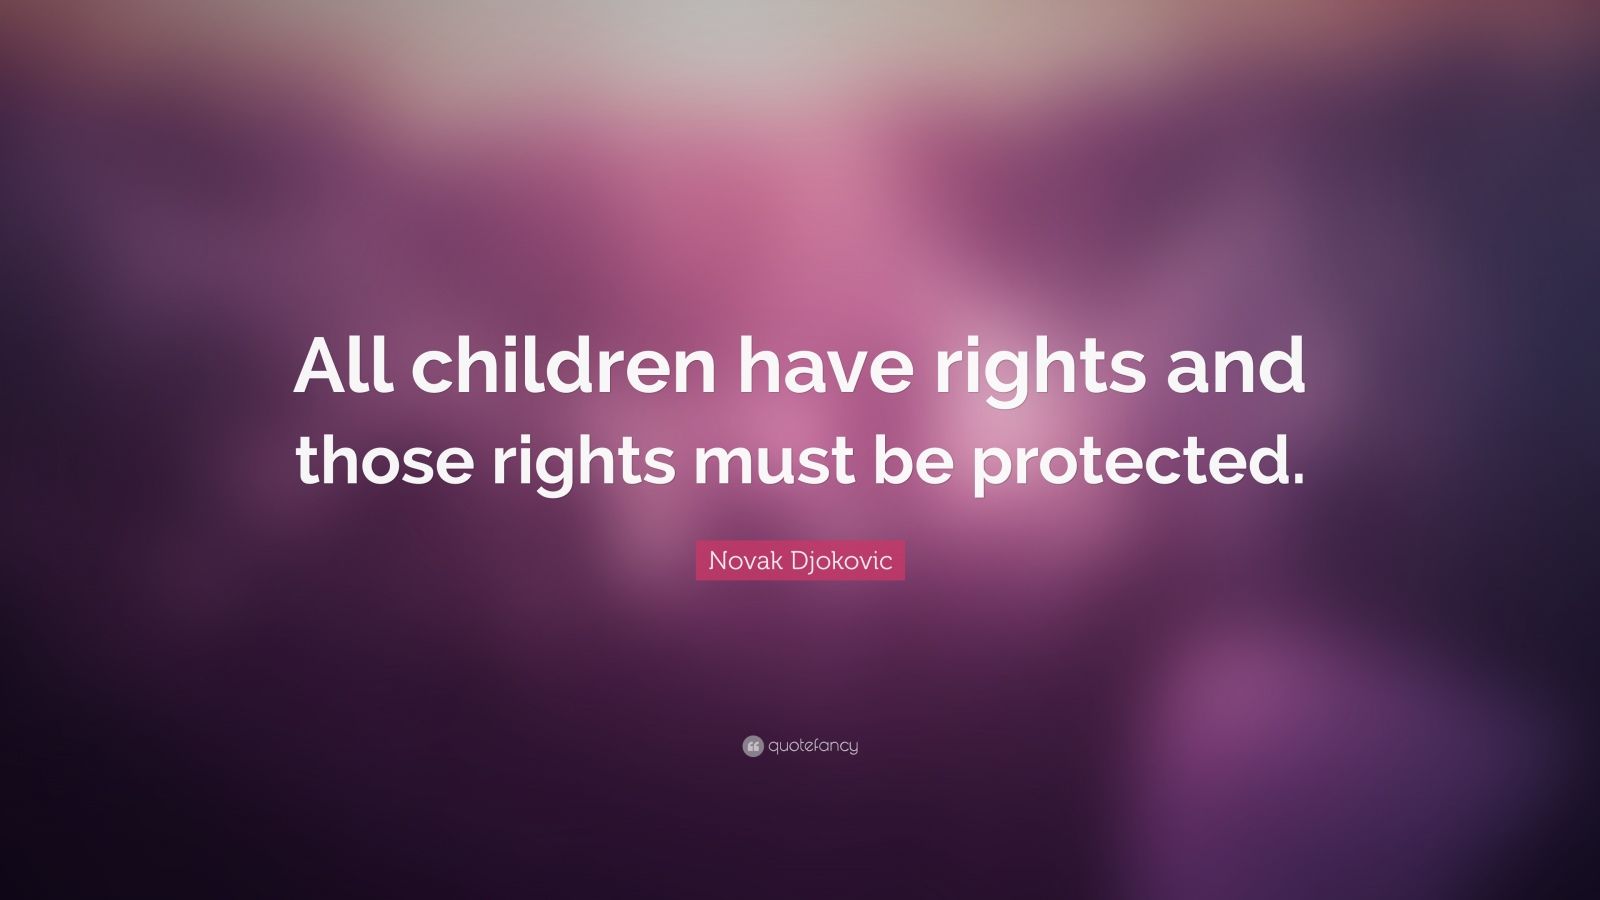 Novak Djokovic Quote: “All children have rights and those rights must